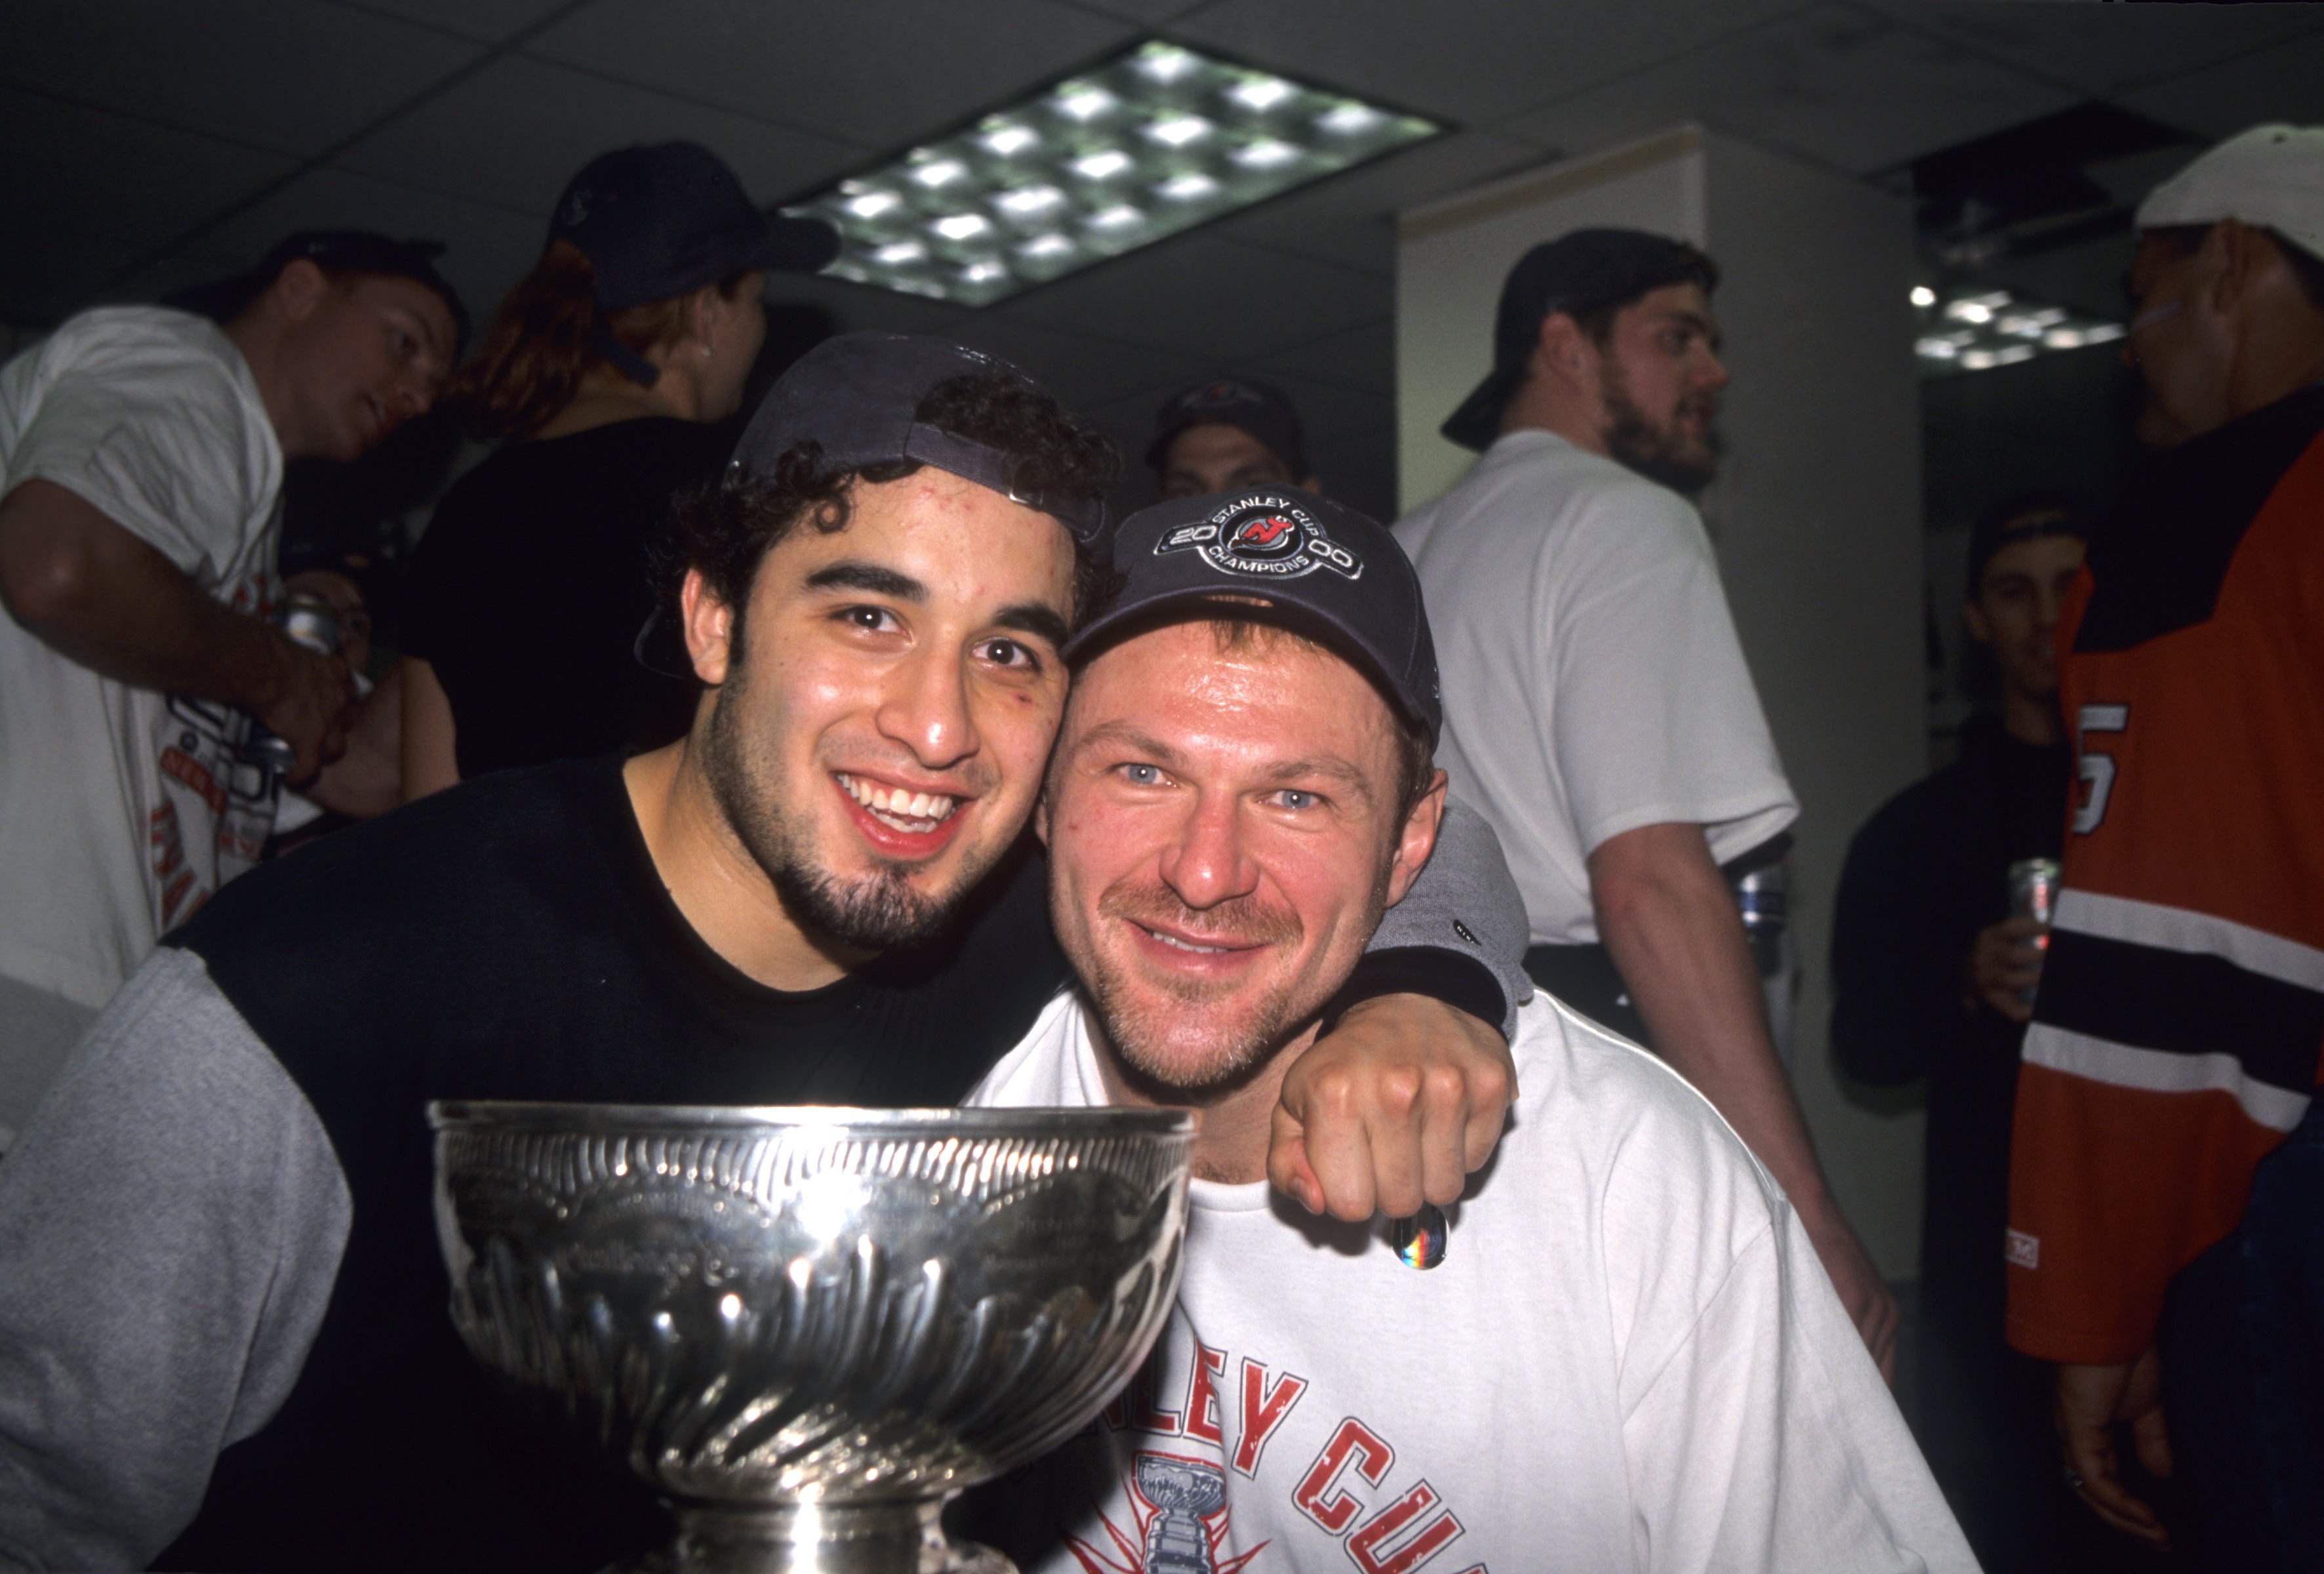 DALLAS - JUNE 10: Claude Lemieux #22 of the New Jersey Devils and Scott Gomez celebrate with the Stanley Cup Trophy after winning the 2000 Stanley Cup Finals game against the Dallas Stars at Reunion Arena on June 10, 2000 in Dallas, Texas. (Photo by: Jim